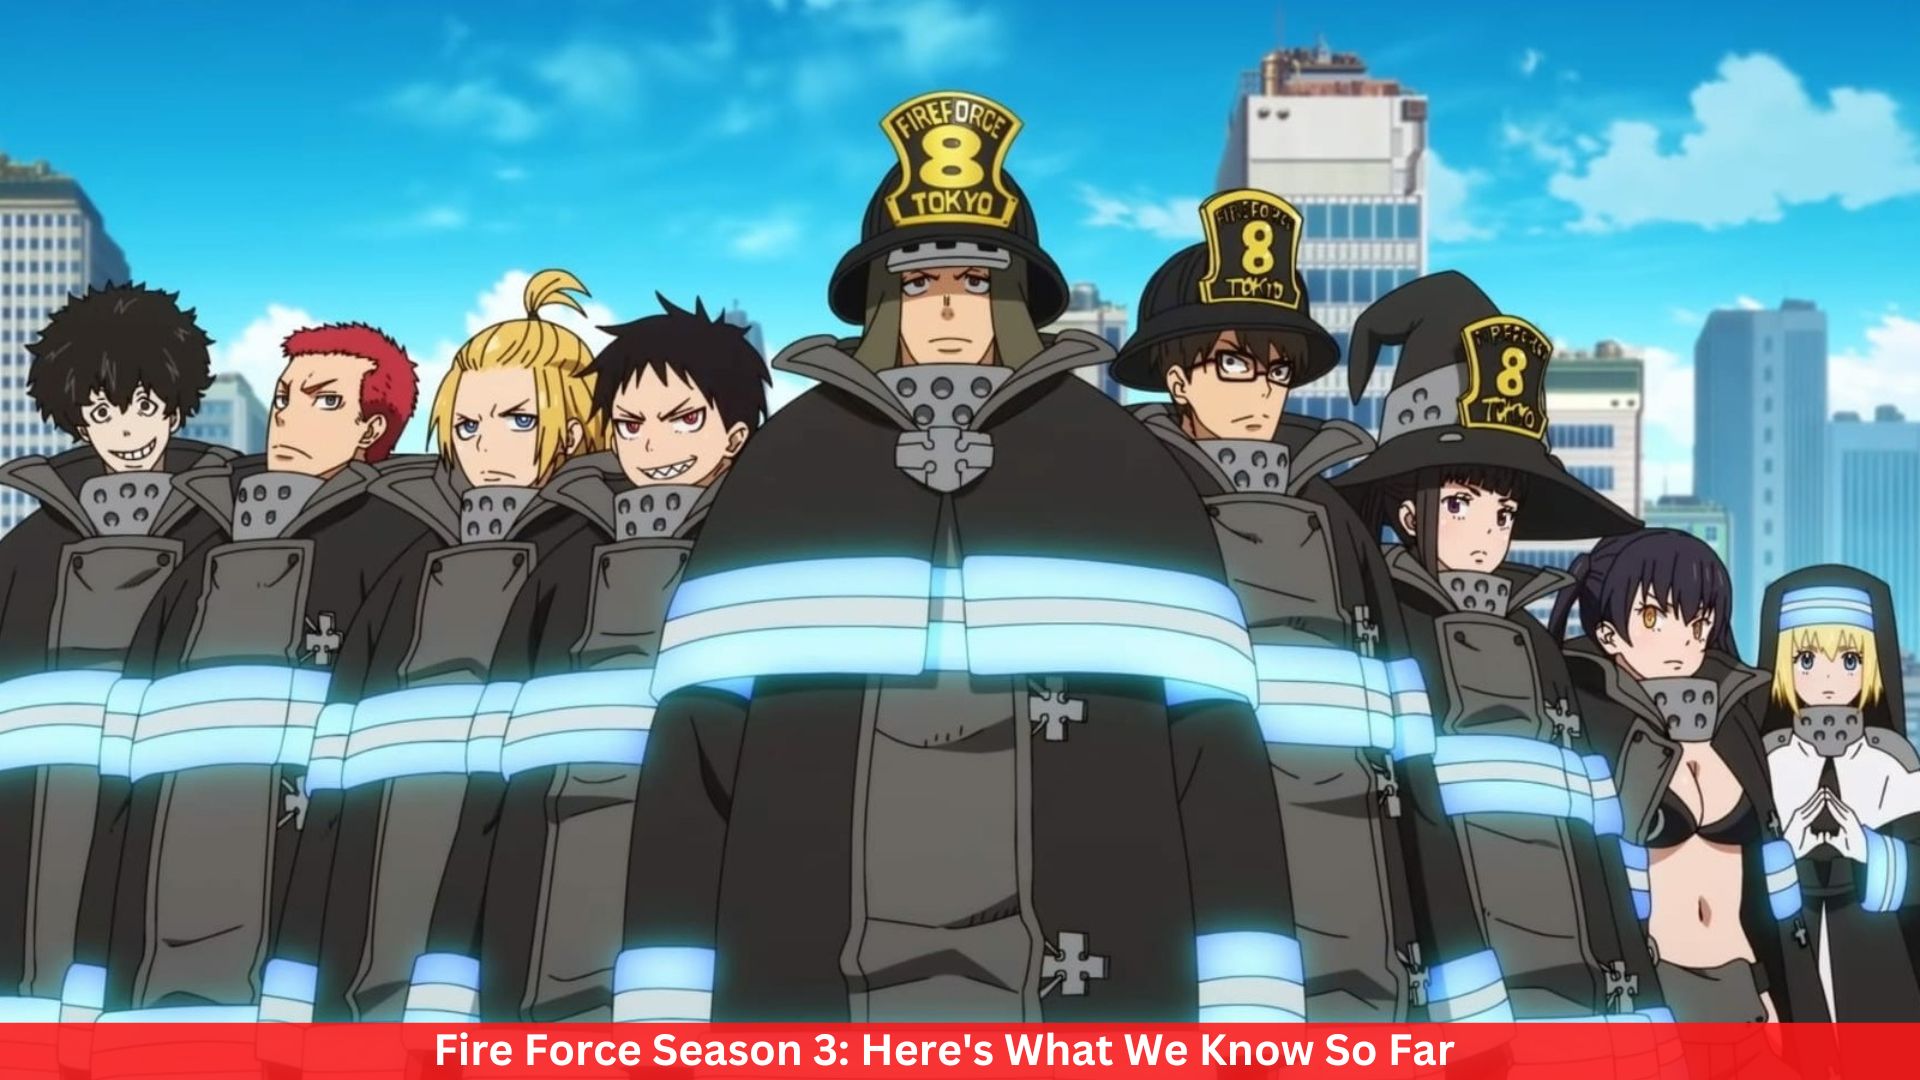 Fire Force Season 3: Here's What We Know So Far